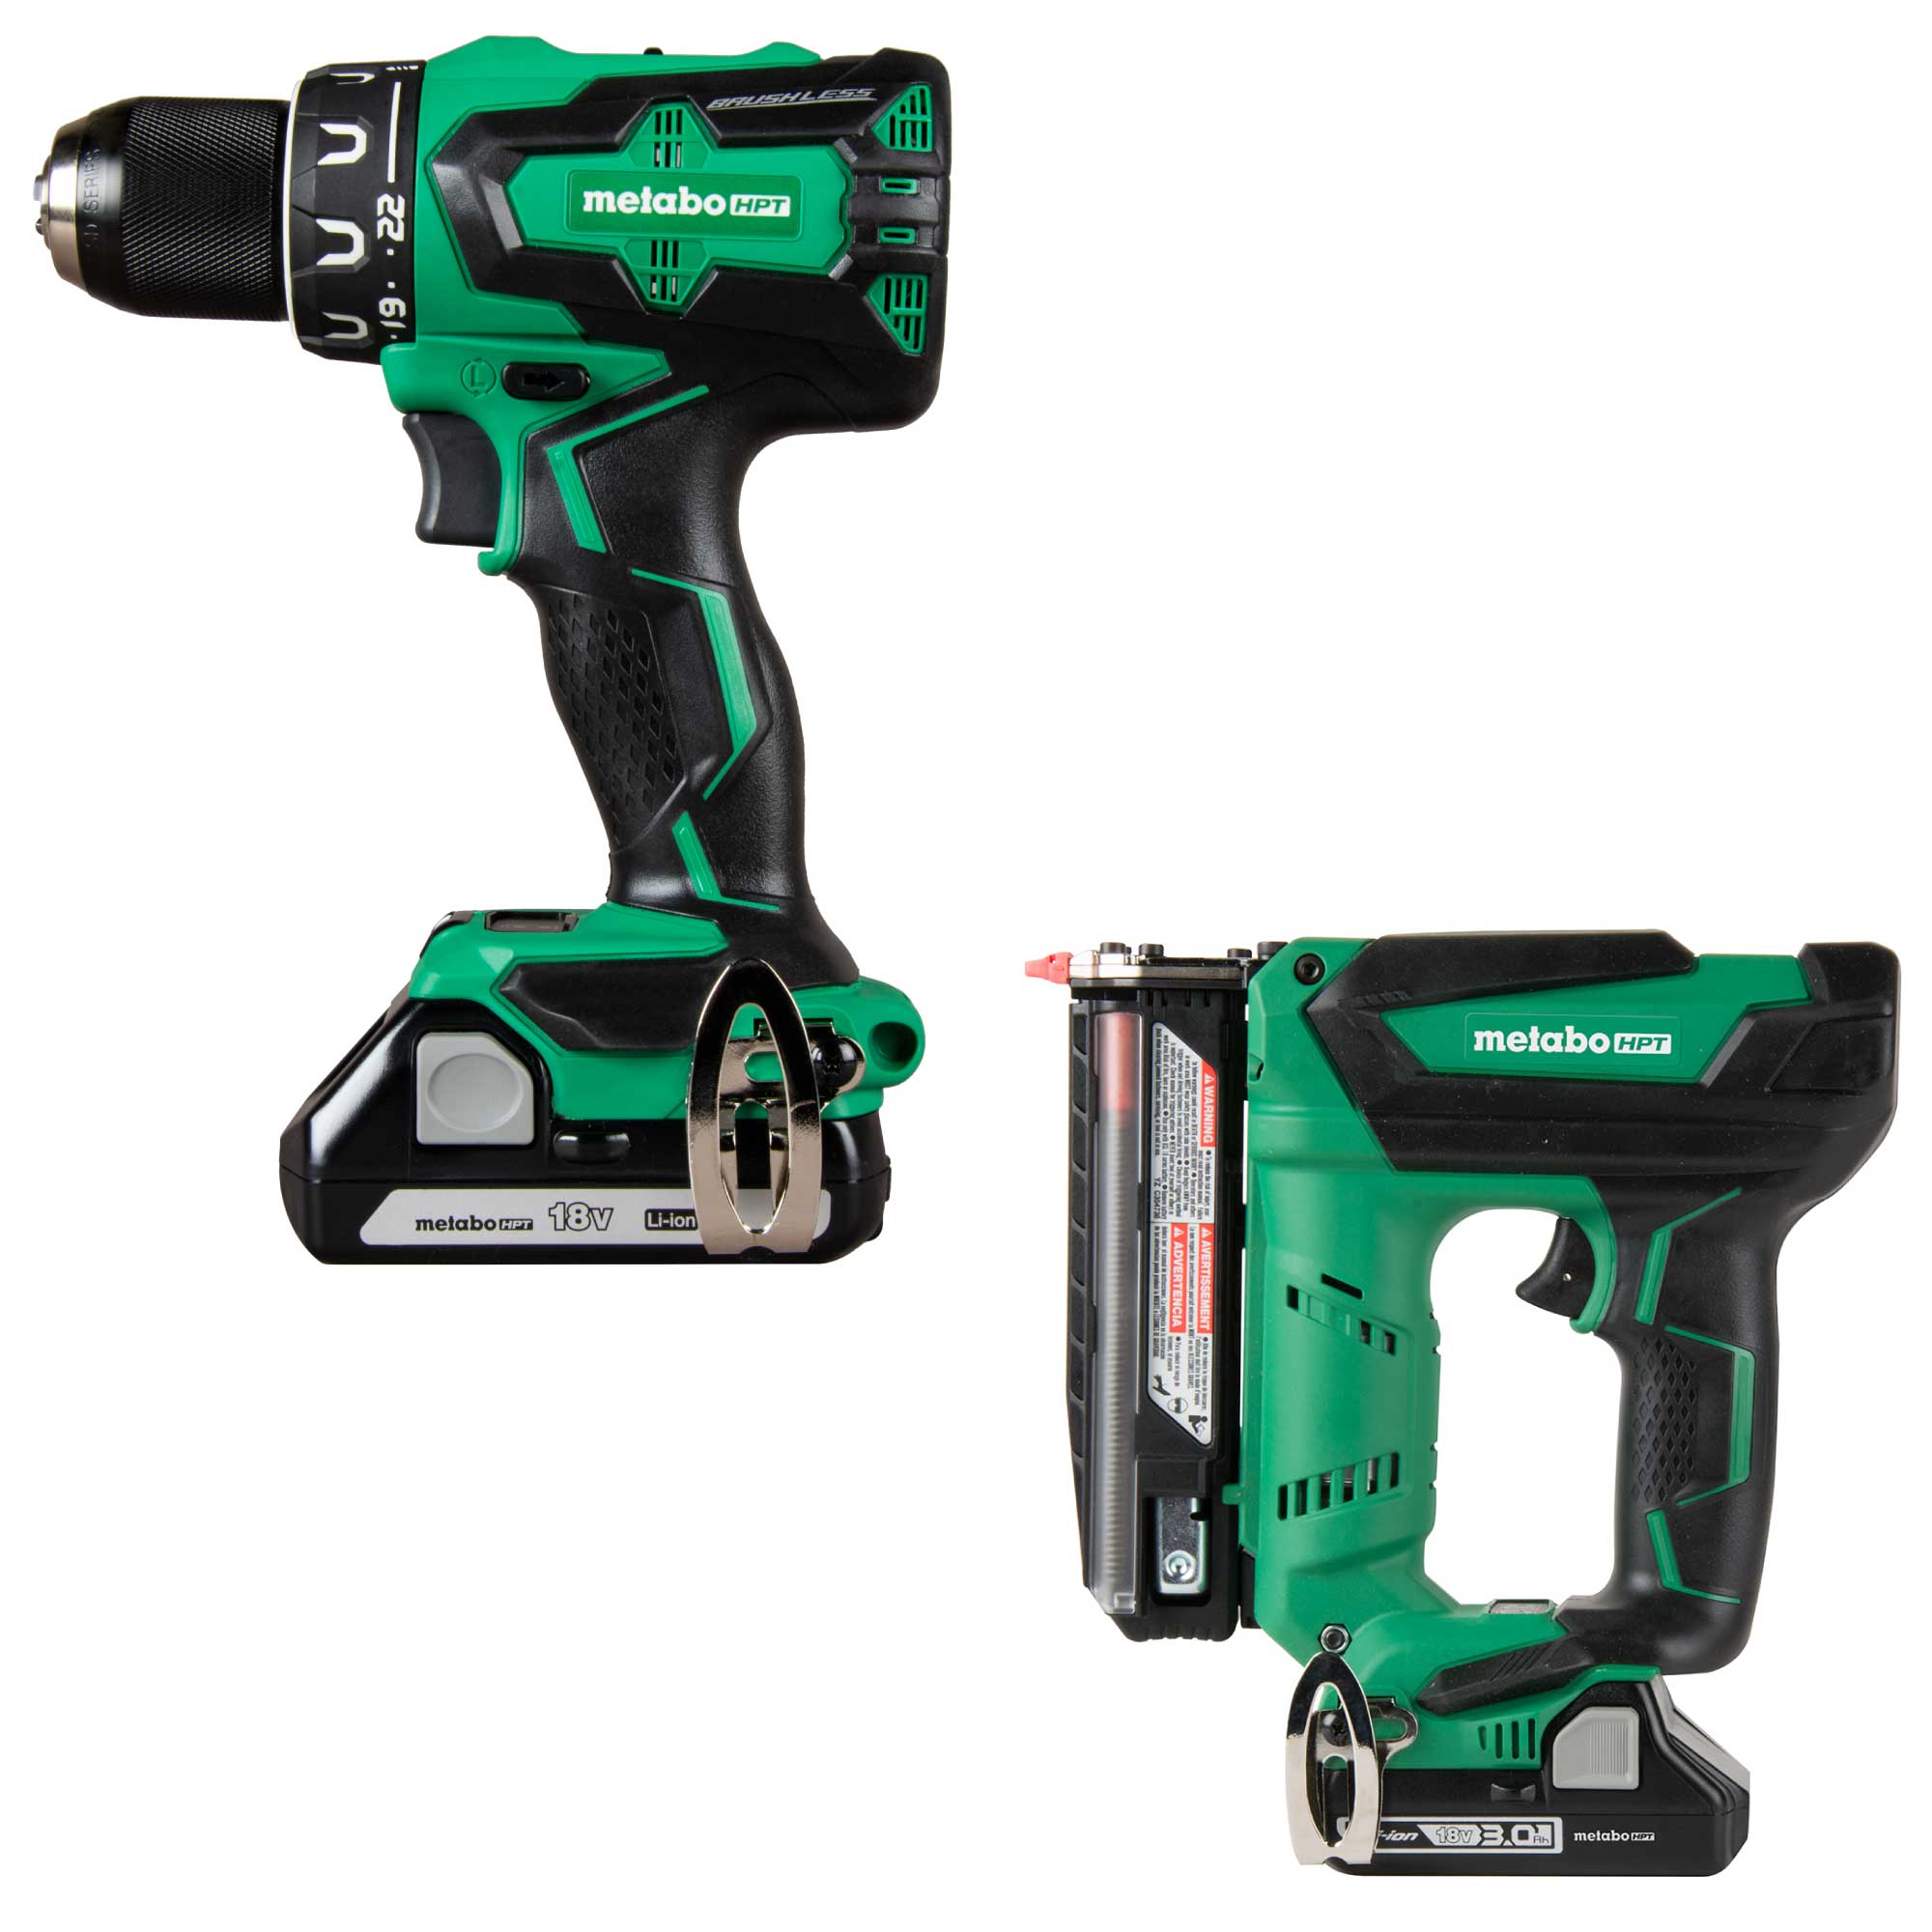 Metabo HPT MultiVolt 18-Volt 1/2-in Brushless Cordless Drill (2-batteries included and charger included) with MultiVolt 18-Volt 23-Gauge Cordless Pin